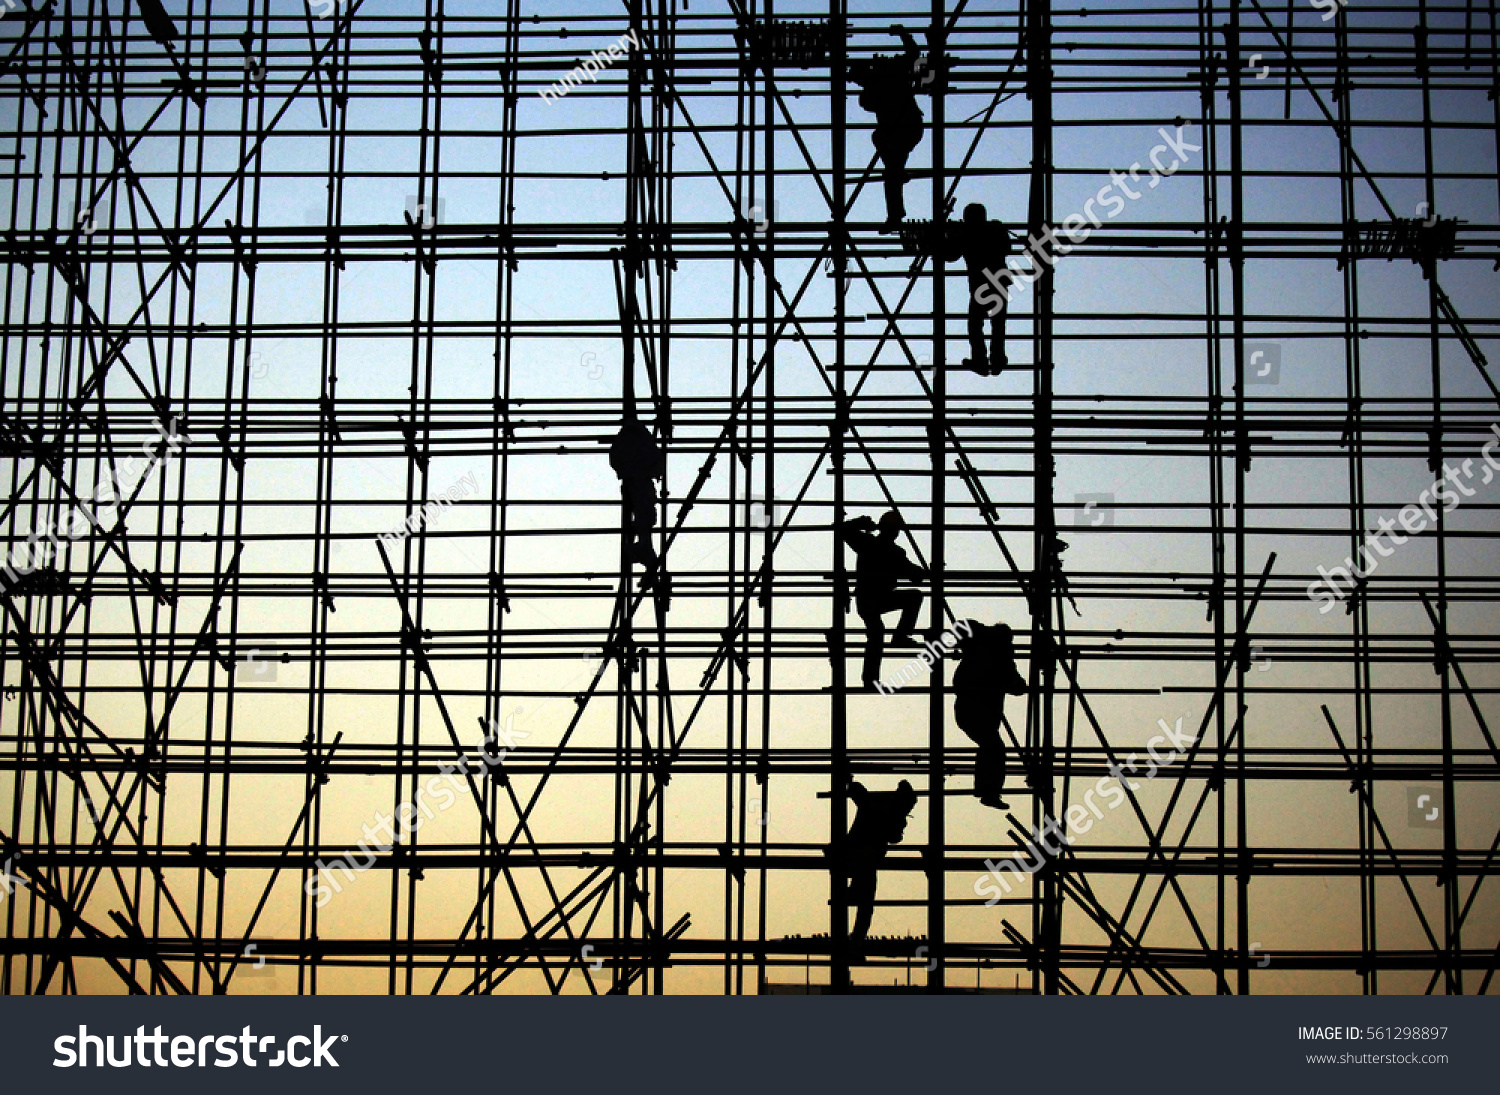 evening, the workers are climbing the silhouette of scaffolding in the high altitude, horizontal and vertical scaffolding formed a myriad of grid, industrial and modern urban construction background. #561298897